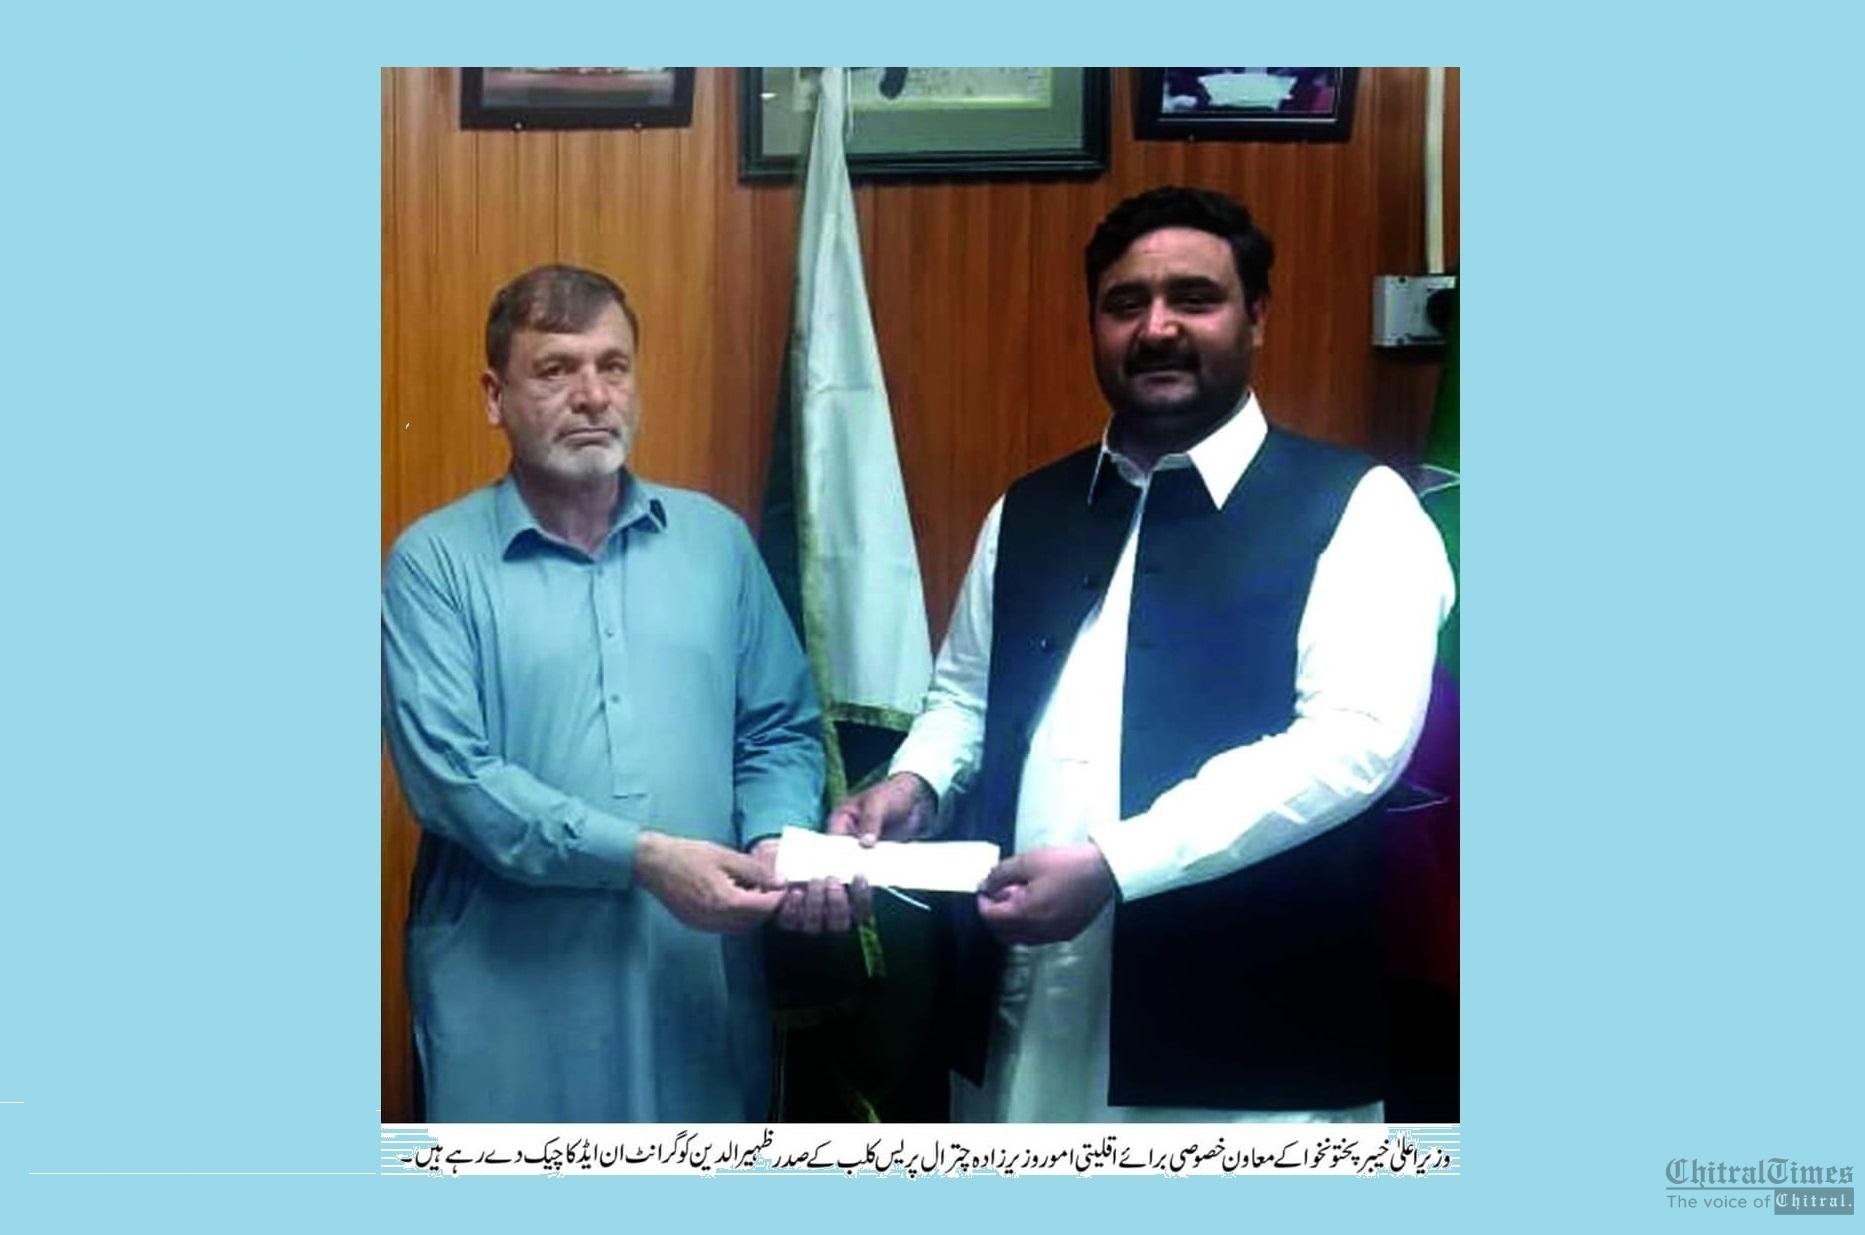 chitraltimes wazir zada giving away cheque to president Chitral press club psh